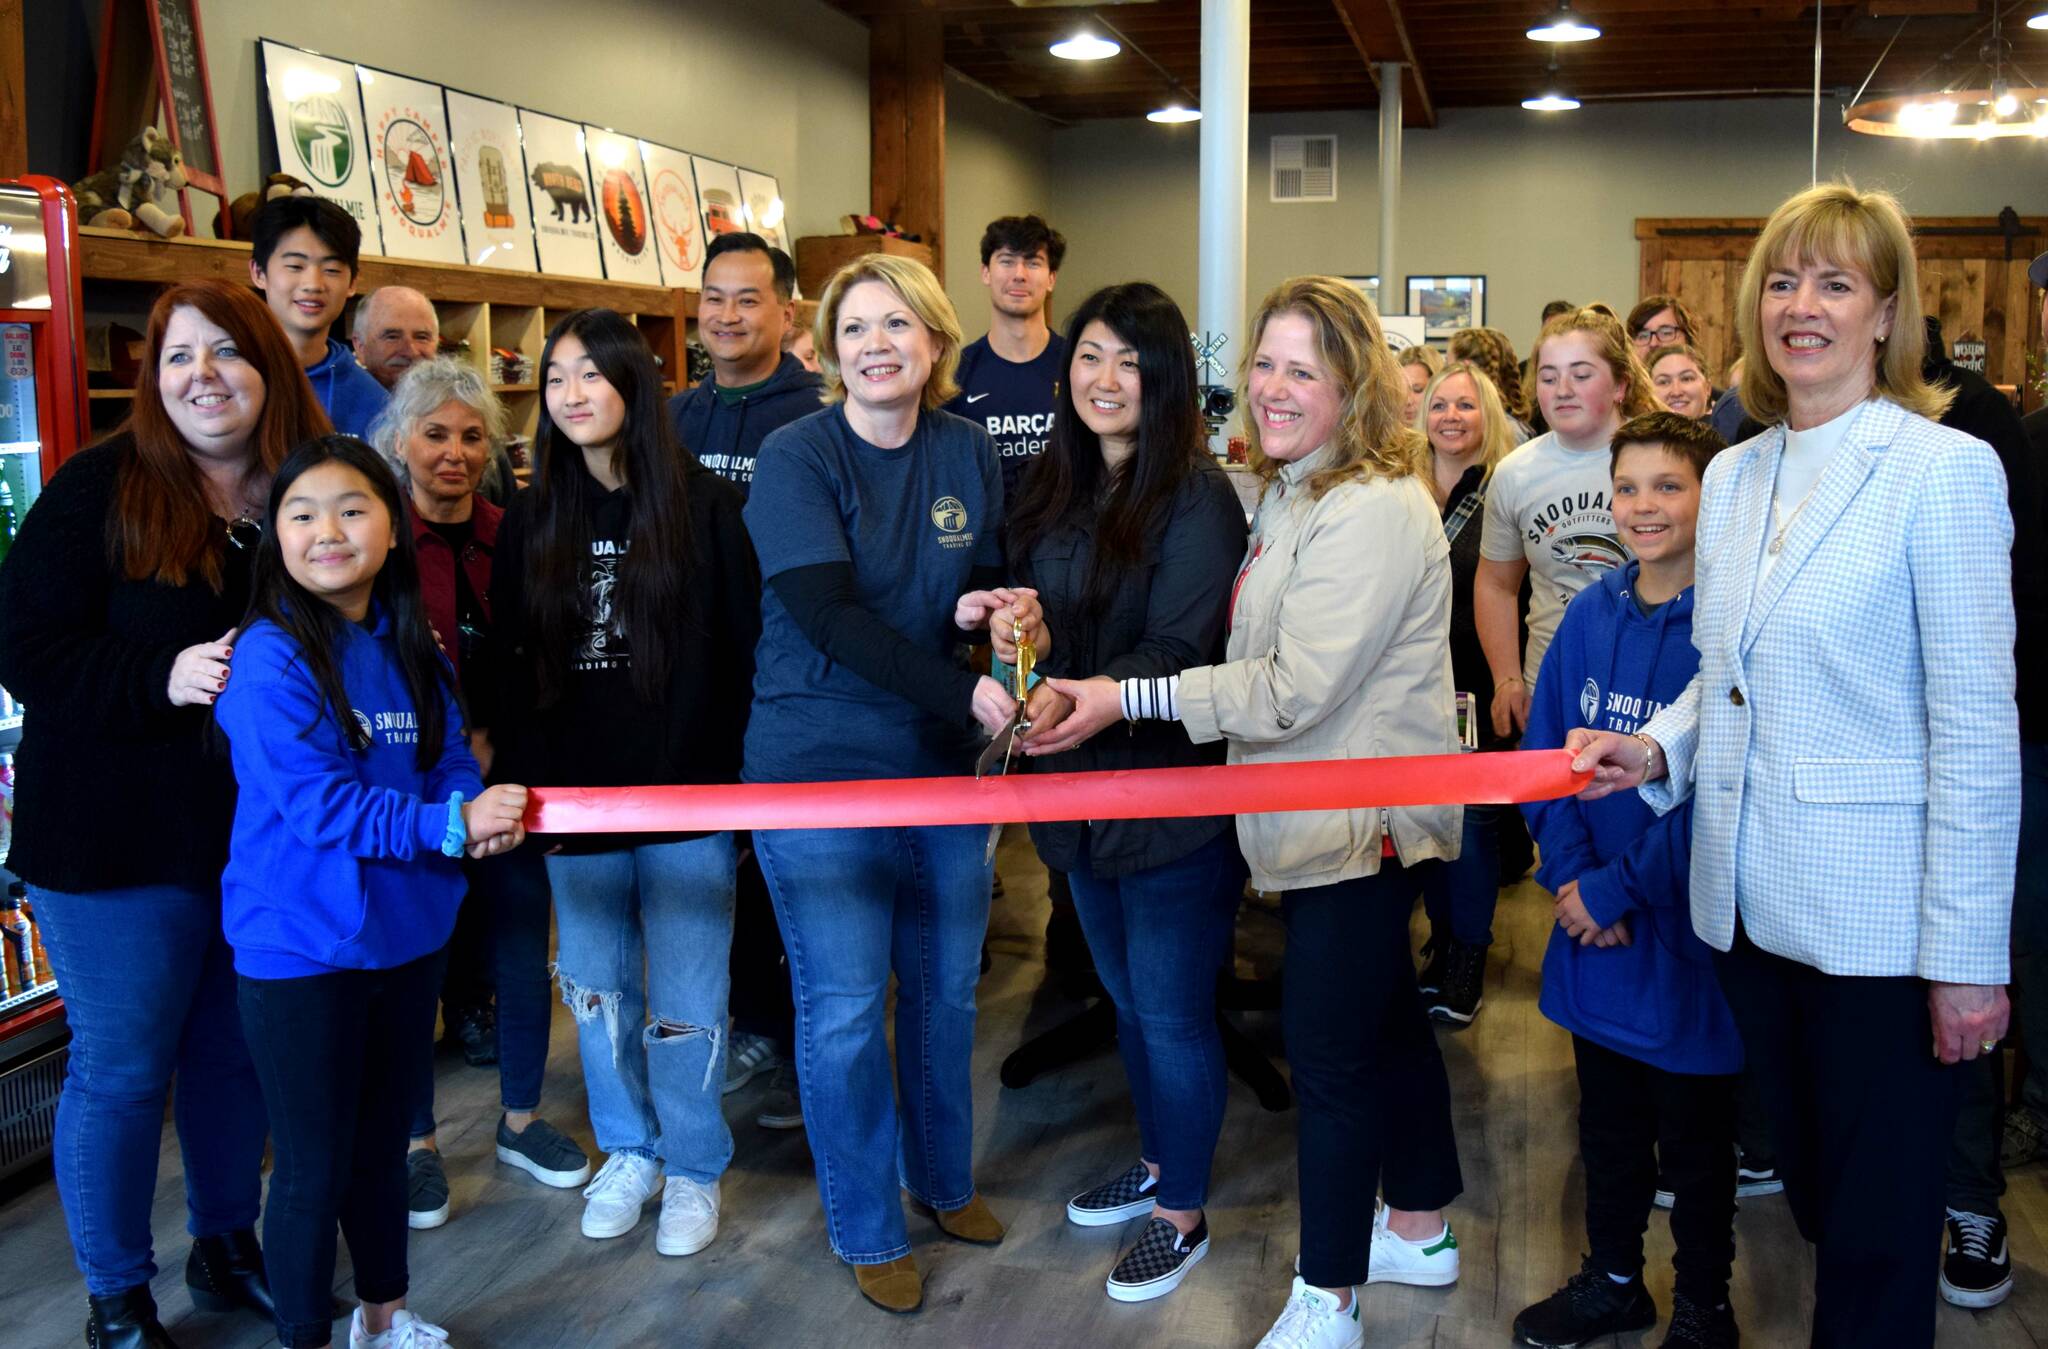 Snoqualmie Trading Co. owners Heather Dean, Julie Chung and Cheri Buell (center) celebrate the grand opening of their new shop with SnoValley Chamber of Commerce Executive Director Kelly Coughlin (left) and Snoqualmie Mayor Katherine Ross (right). Photo Conor Wilson/Valley Record.